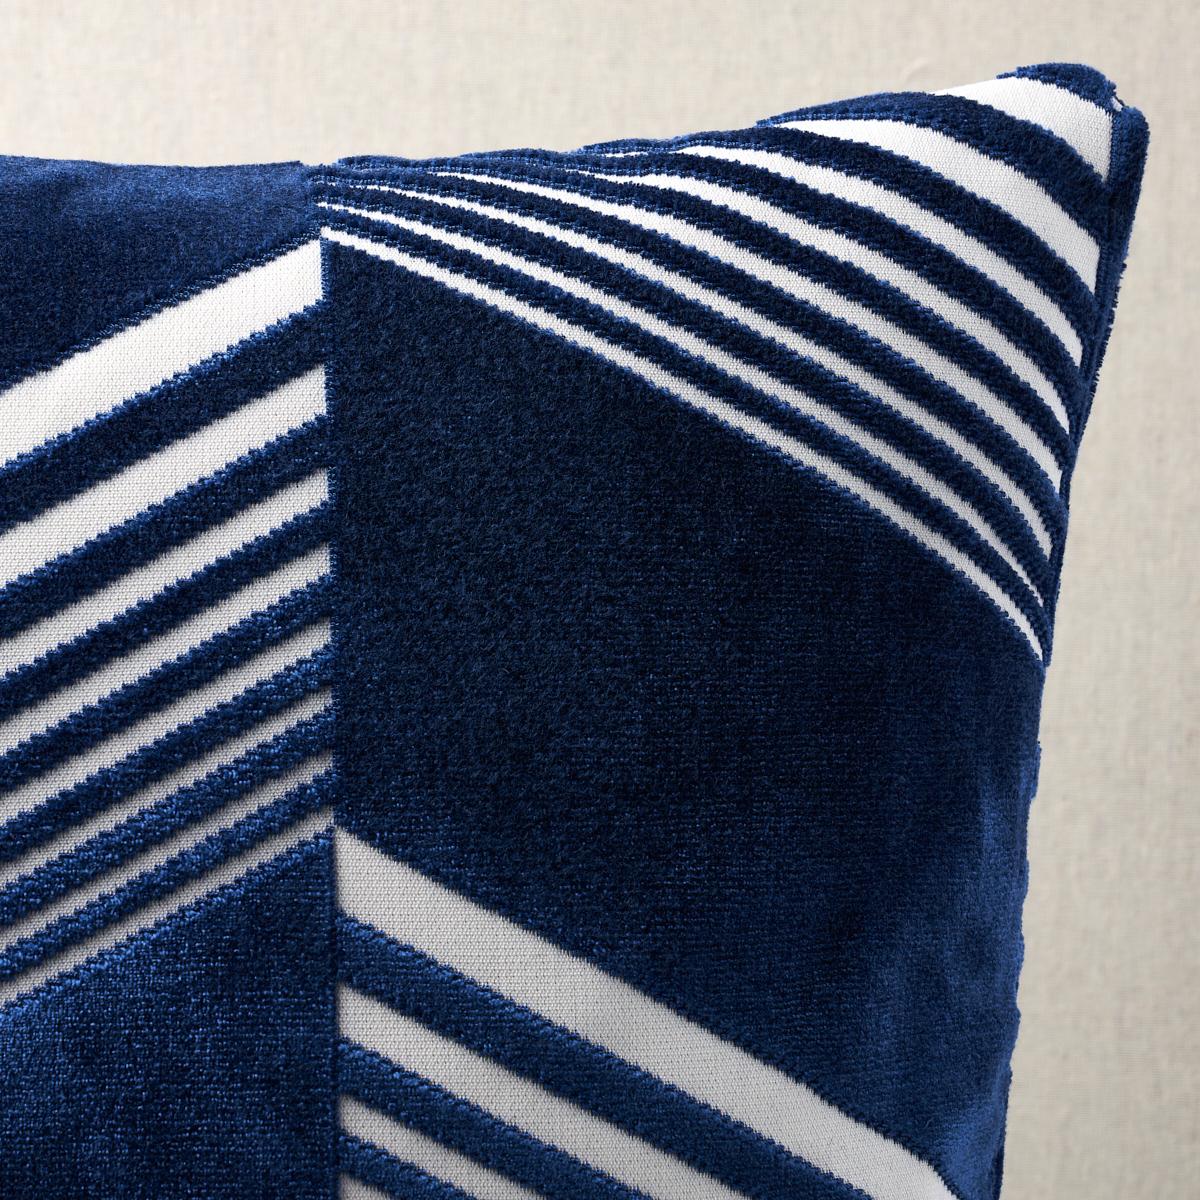 This pillow features Jessie Cut Velvet by Victor Glemaud for Schumacher with a knife edge finish. Created in collaboration with Haitian American fashion designer Victor Glemaud, Jessie Cut Velvet in navy & white is a stylish offset chevron design